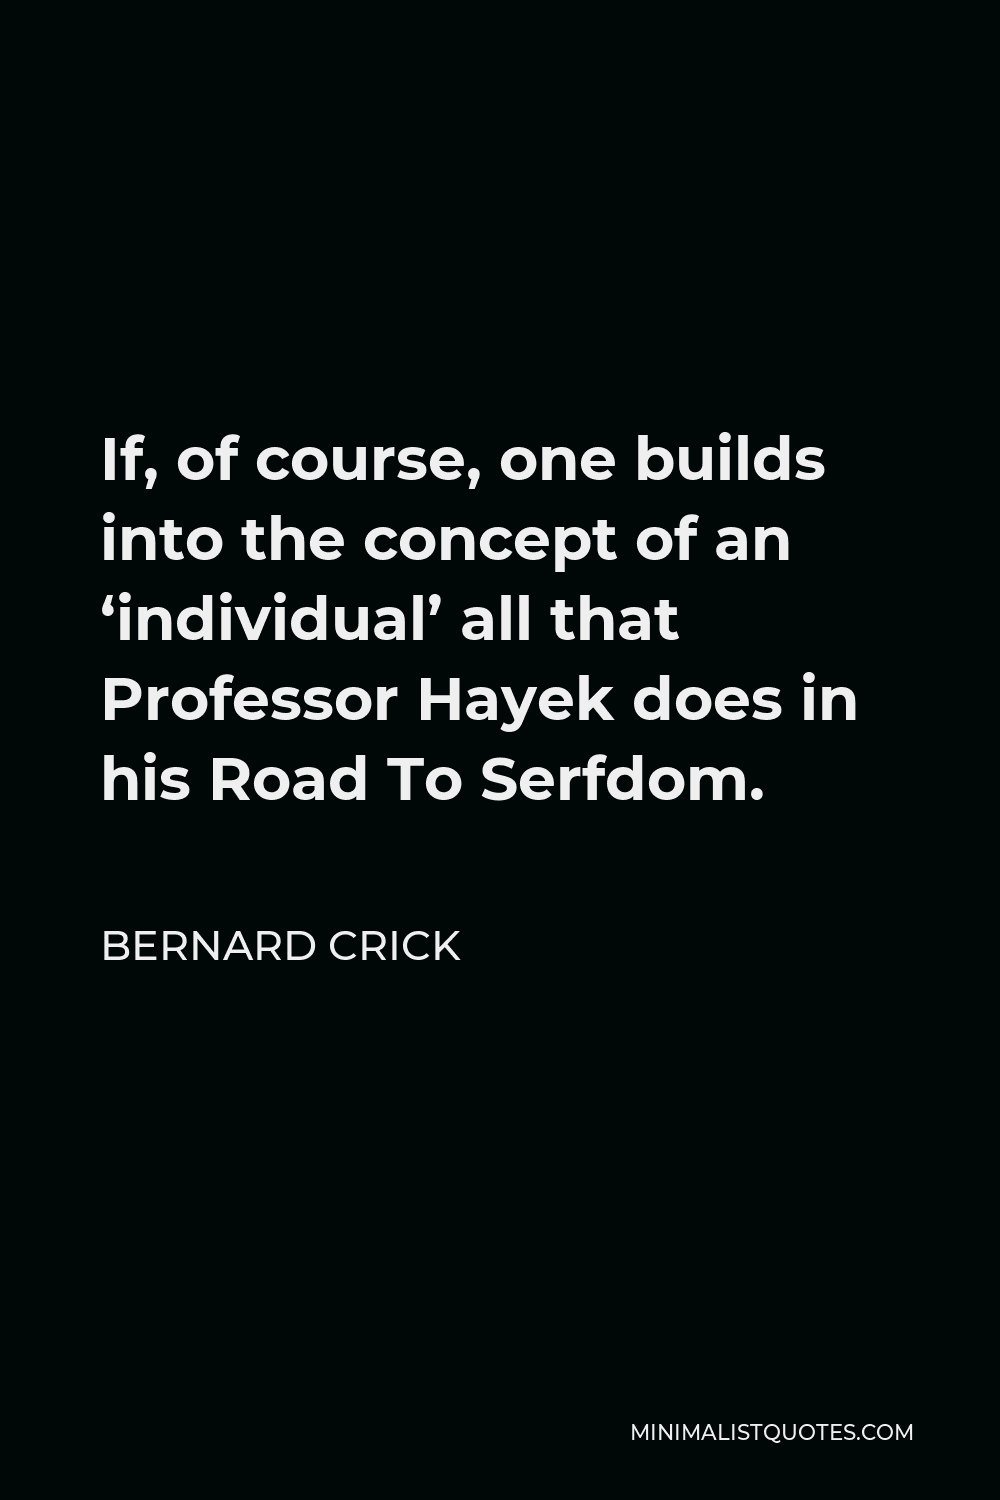 Bernard Crick Quote - If, of course, one builds into the concept of an ‘individual’ all that Professor Hayek does in his Road To Serfdom.